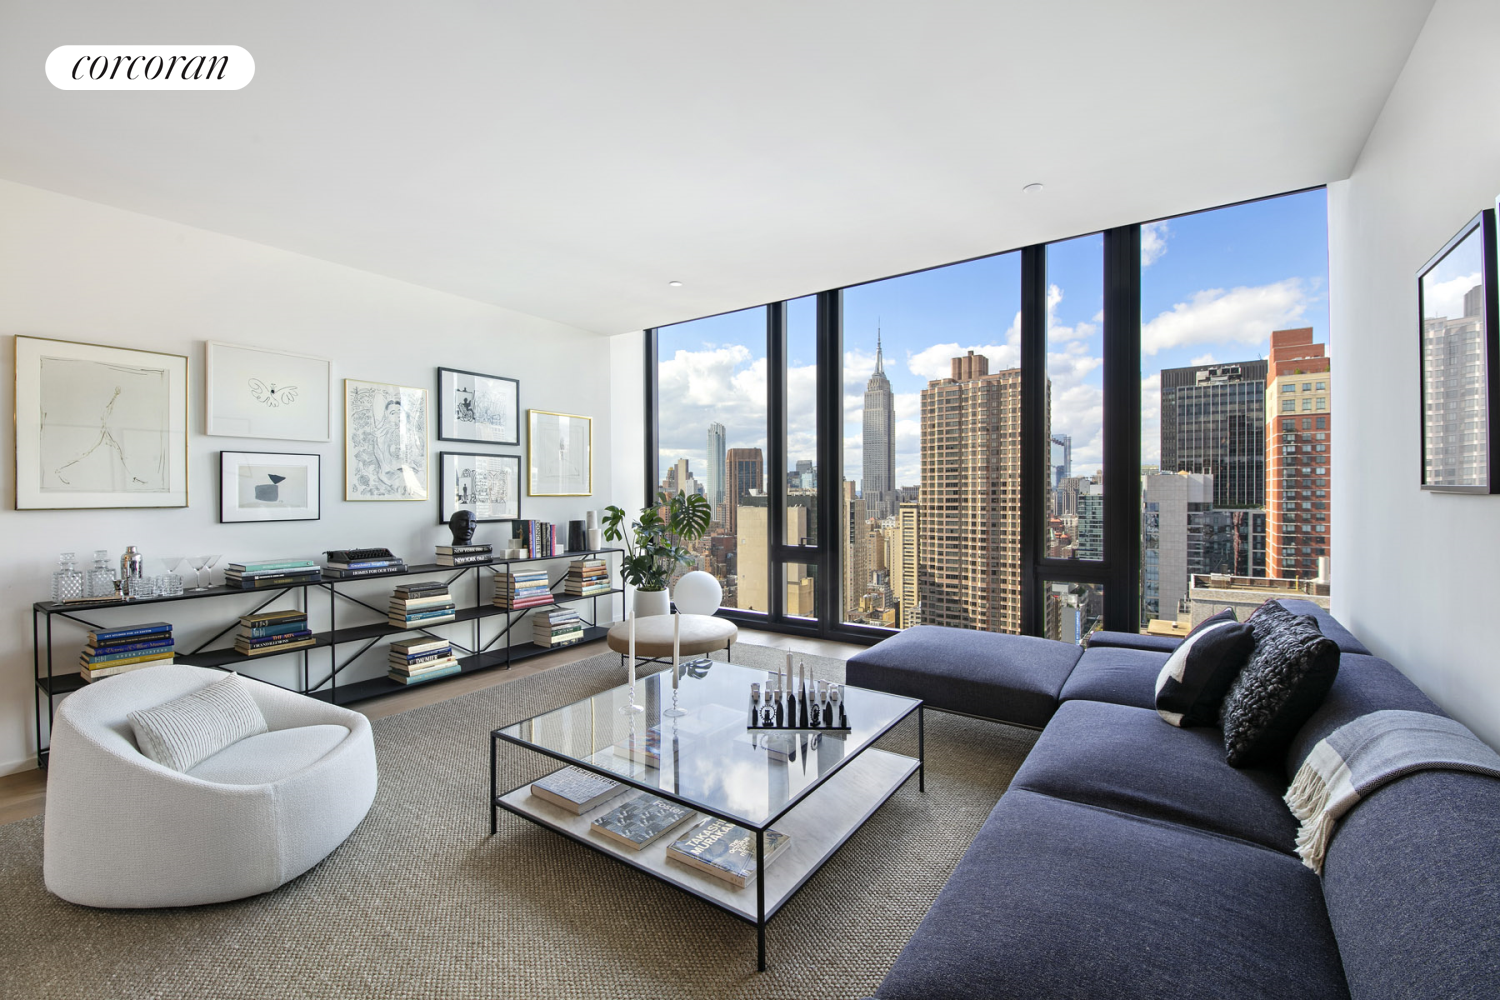 695 1st Avenue 39F, Murray Hill, Midtown East, NYC - 2 Bedrooms  
2.5 Bathrooms  
4 Rooms - 